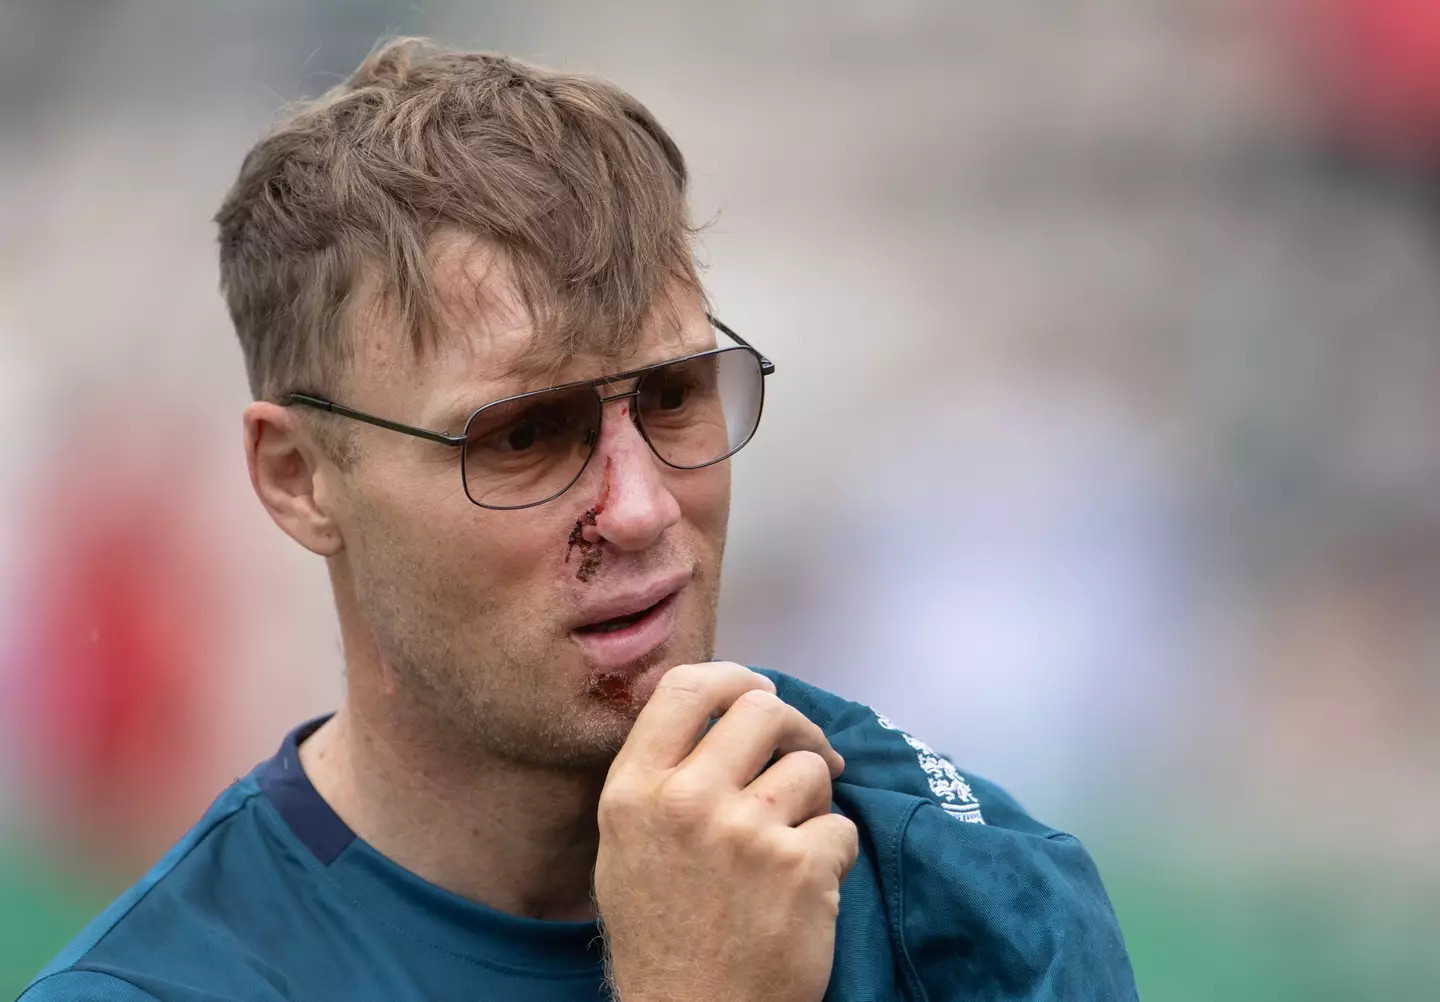 Freddie Flintoff said he was 'relishing' the chance to get back into cricket.